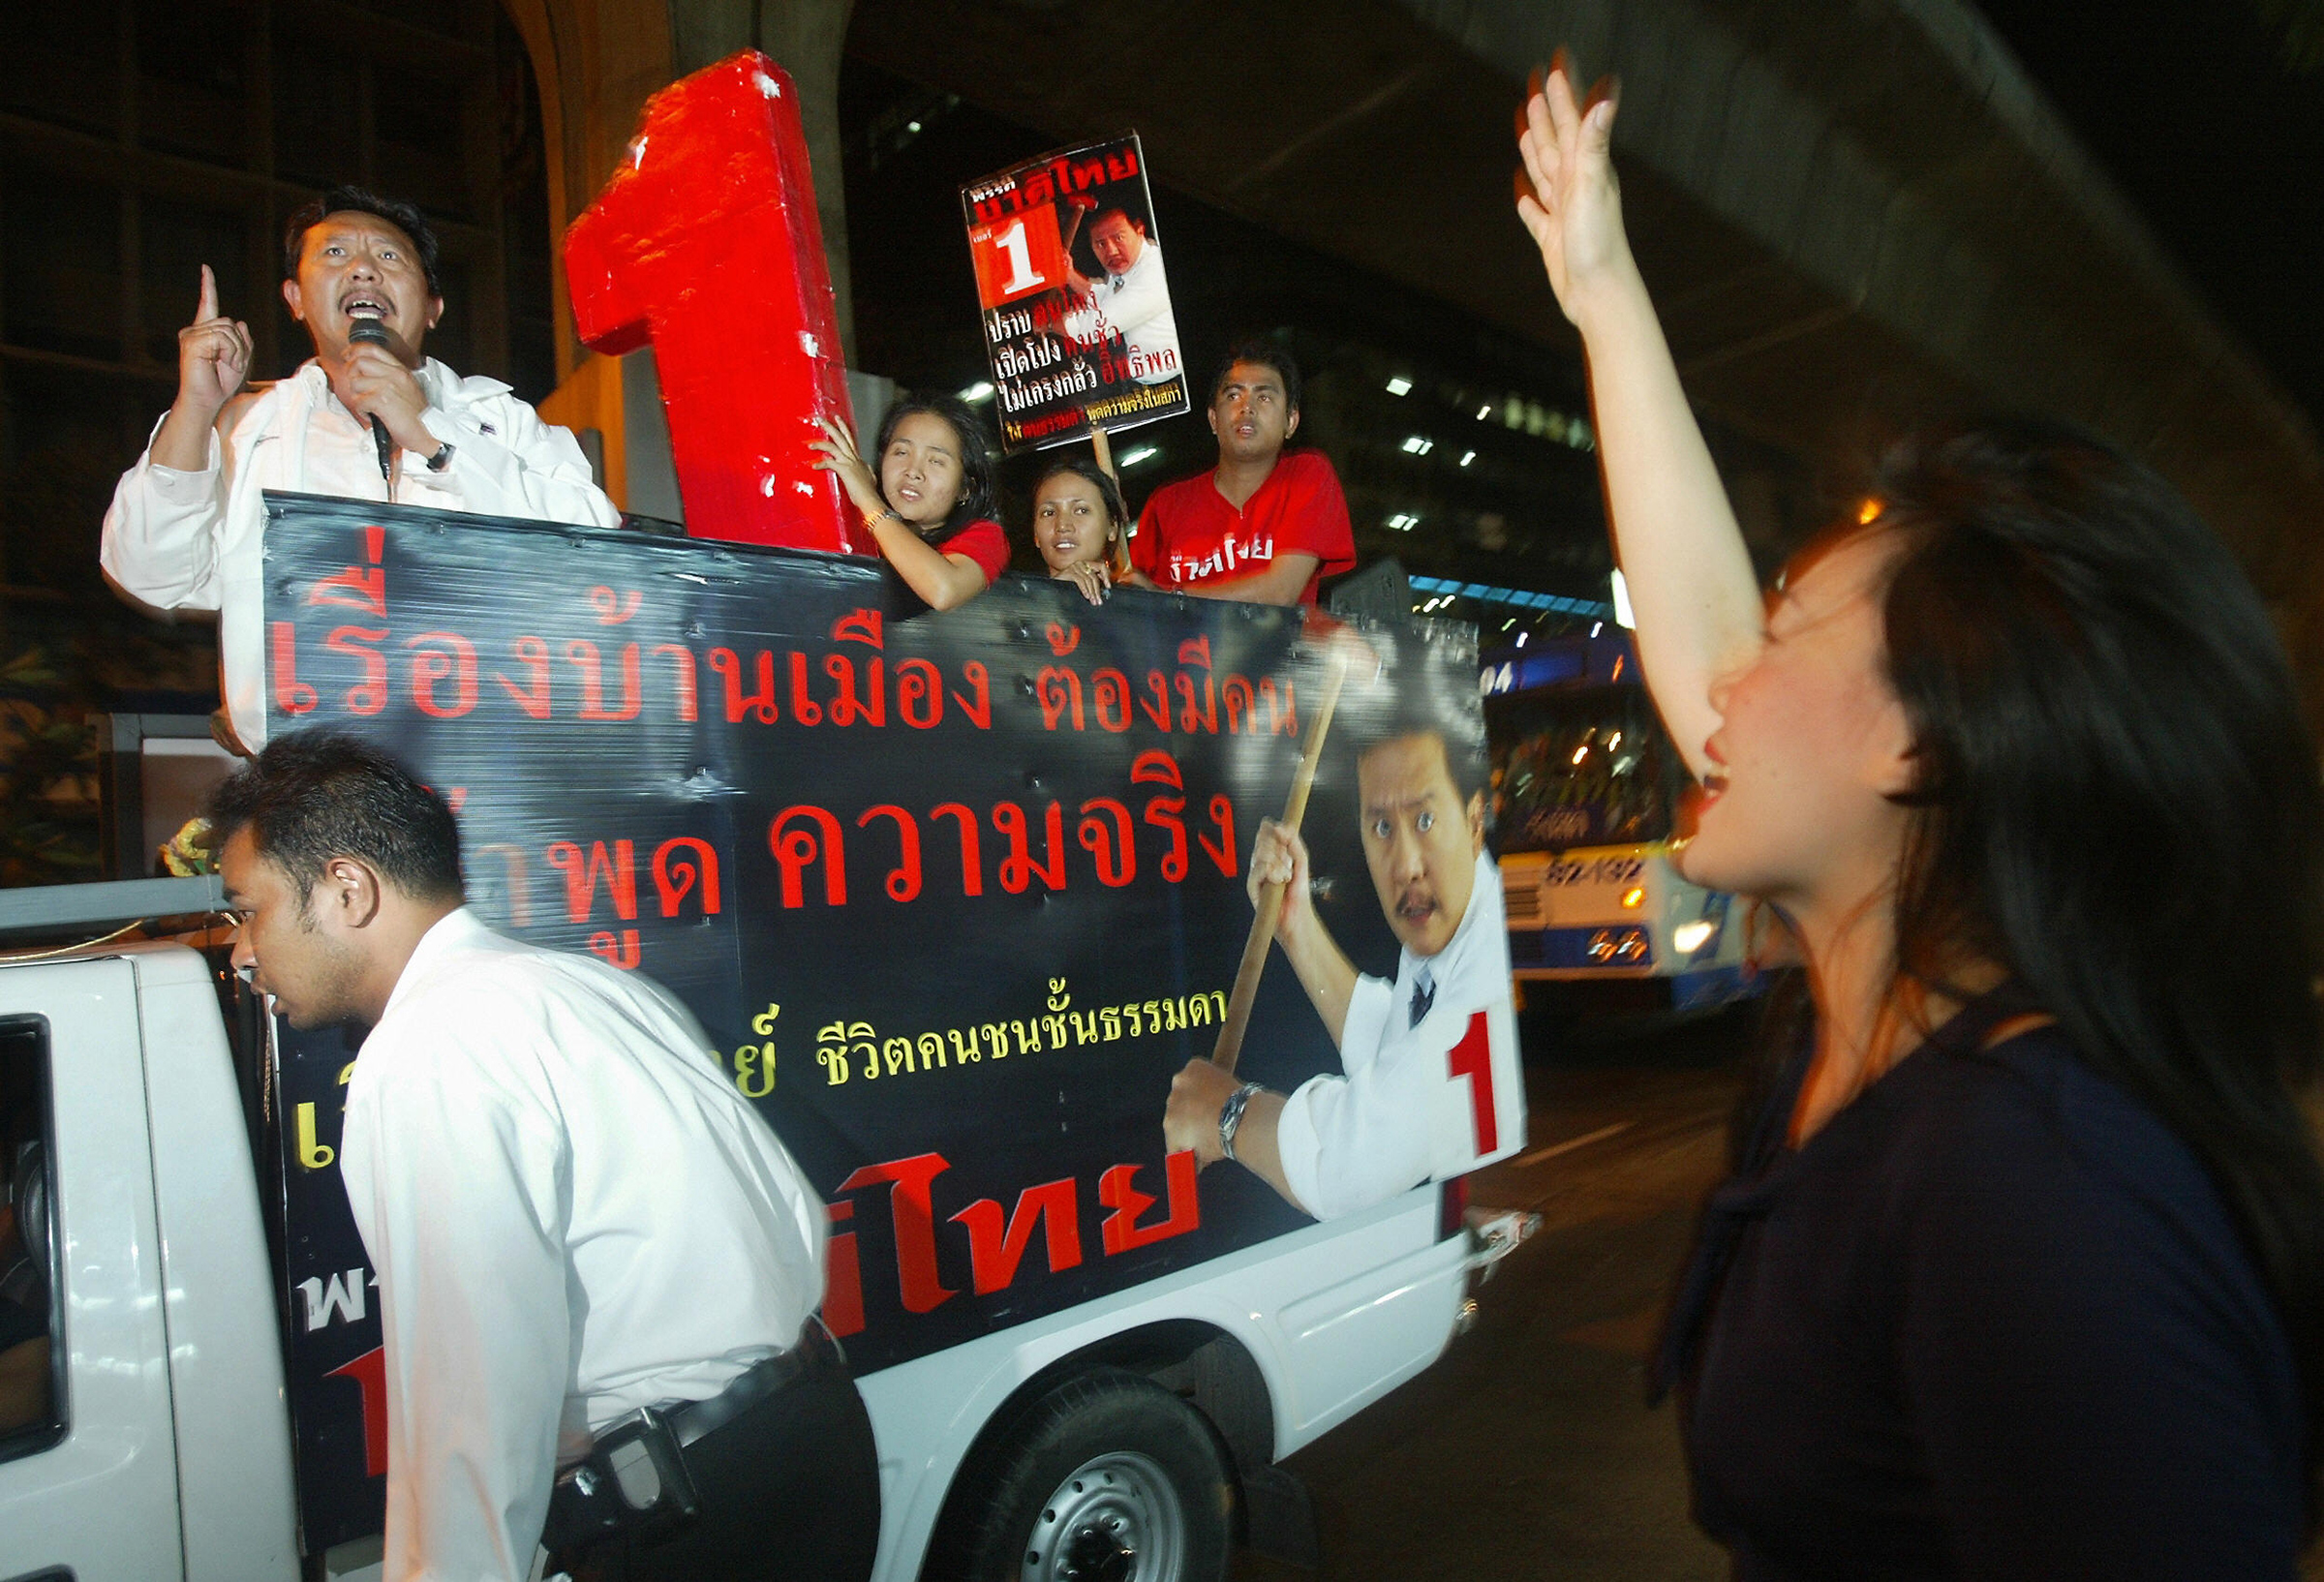 A woman shows her support for candidate Chuwit Kamolvisit as he campaigns through the city's tourist-friendly red light district of Patpong, on Feb. 4, 2005 in Bangkok.